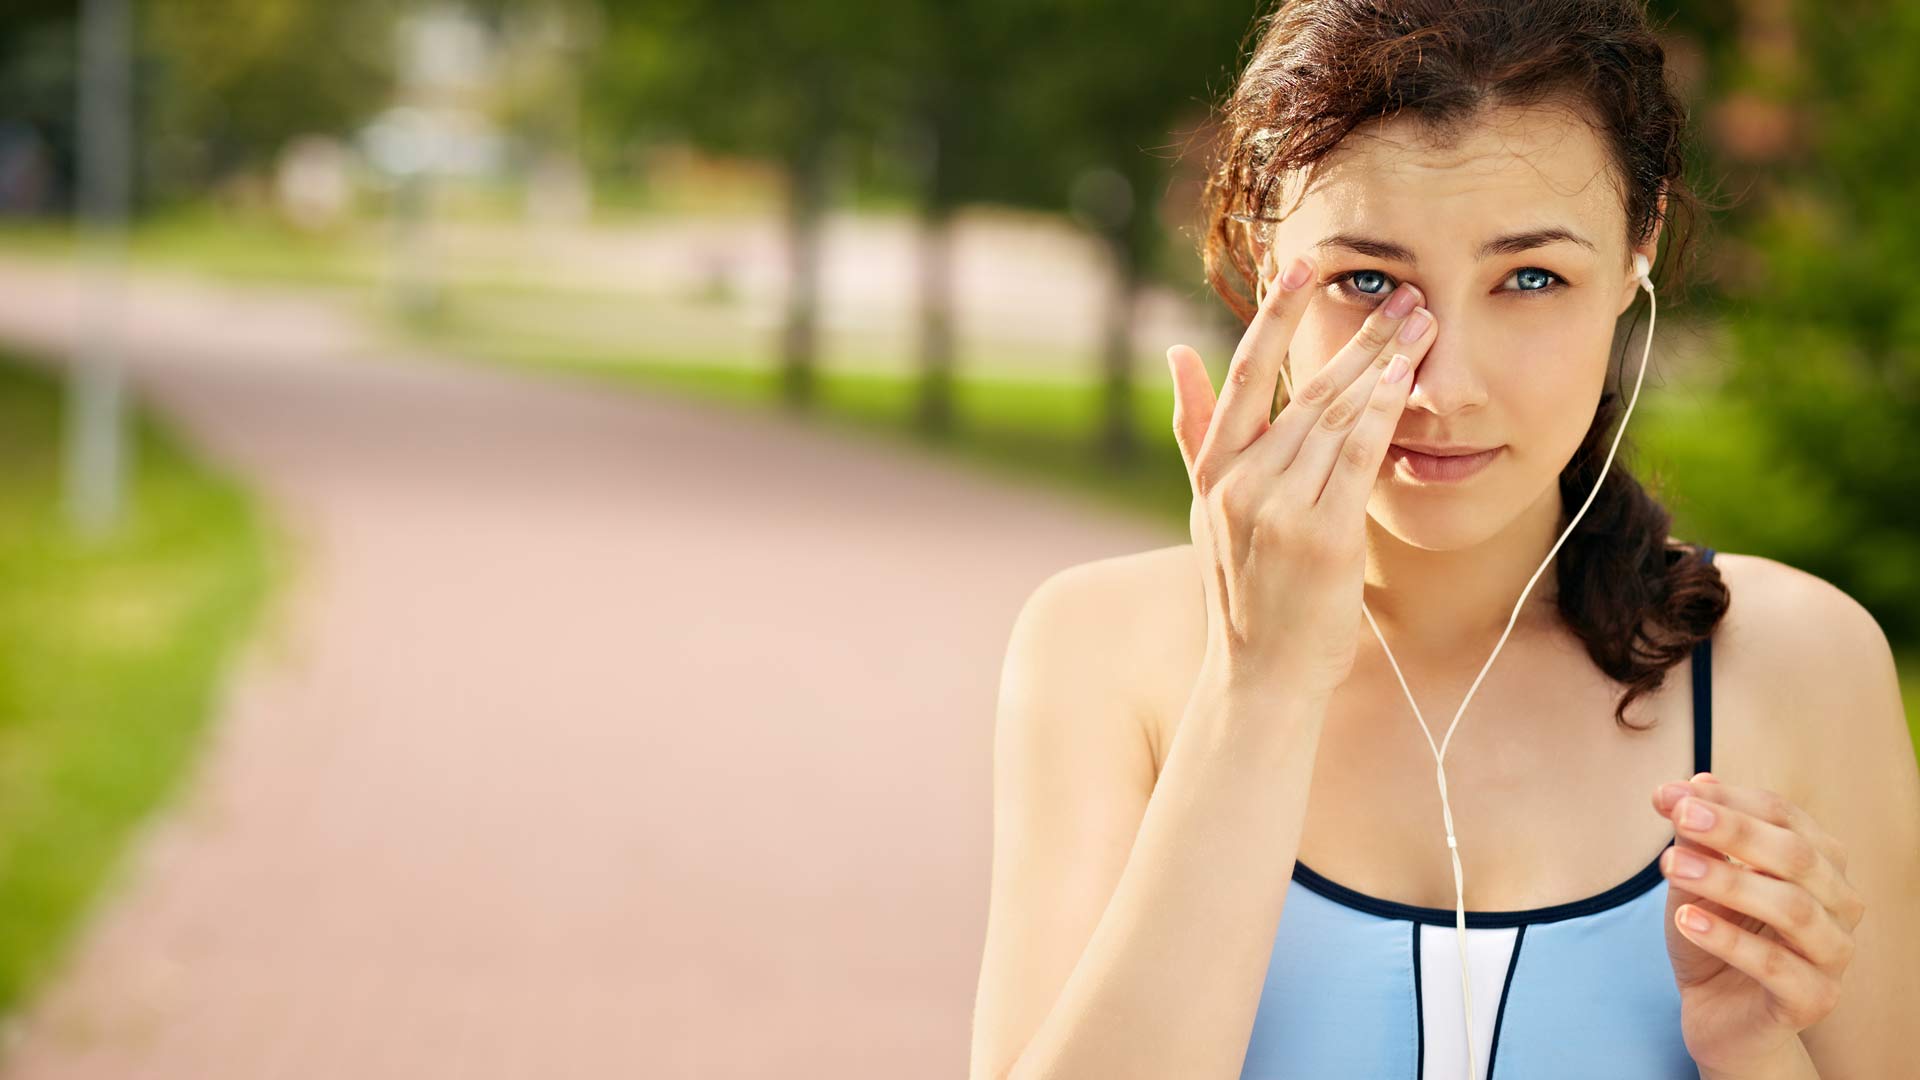 A woman touching her eye while exercising outside on a running trail